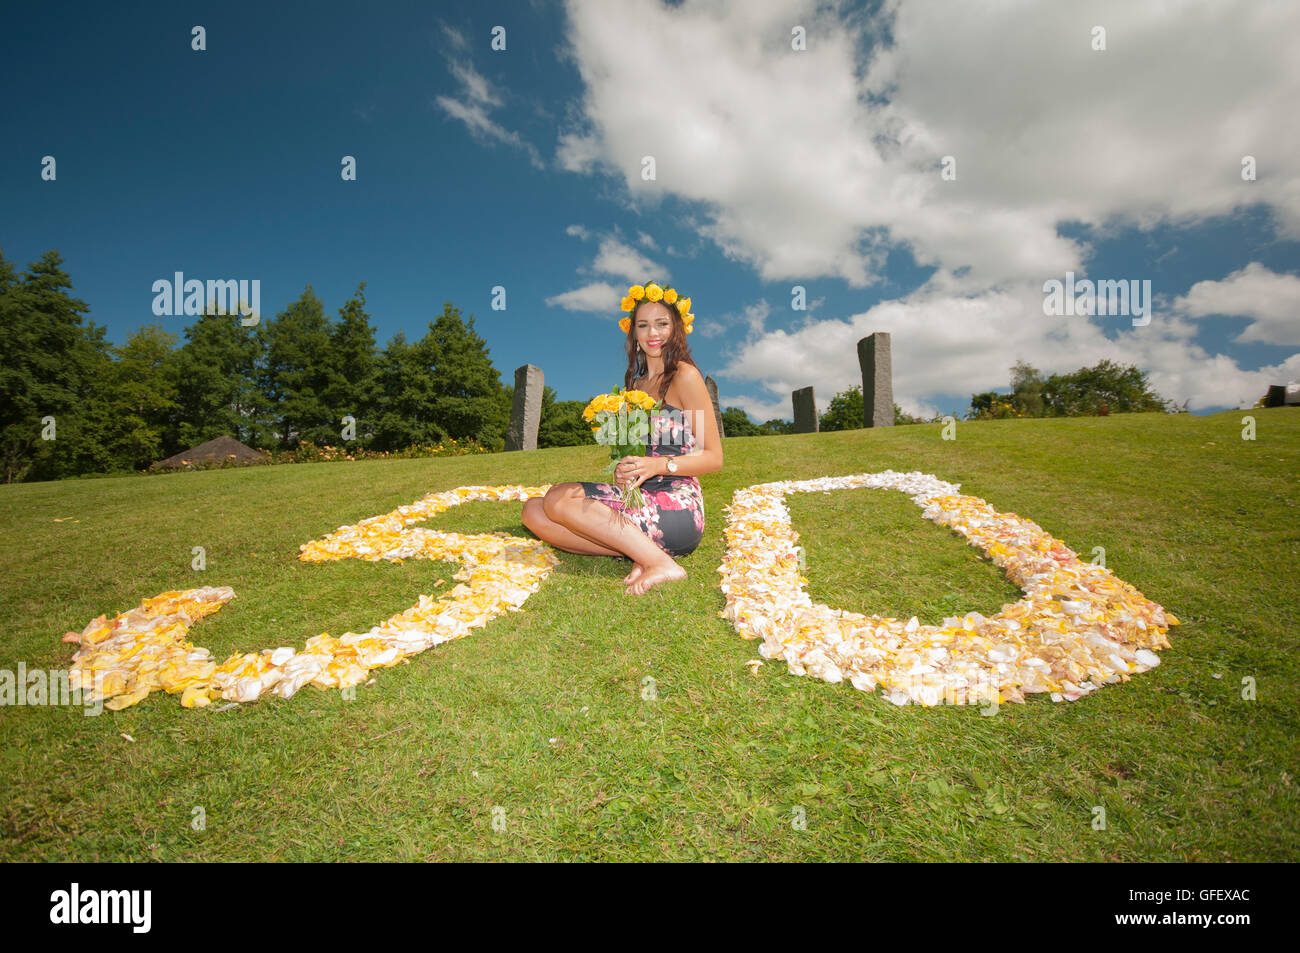 Belfast, Northern Ireland. 9 Jul 2014 - Rebekah Shirley, Miss Northern Ireland 2014, launches Rose Week. This year is the 50th anniversary of the event, held at Dixon Park in Belfast. Stock Photo